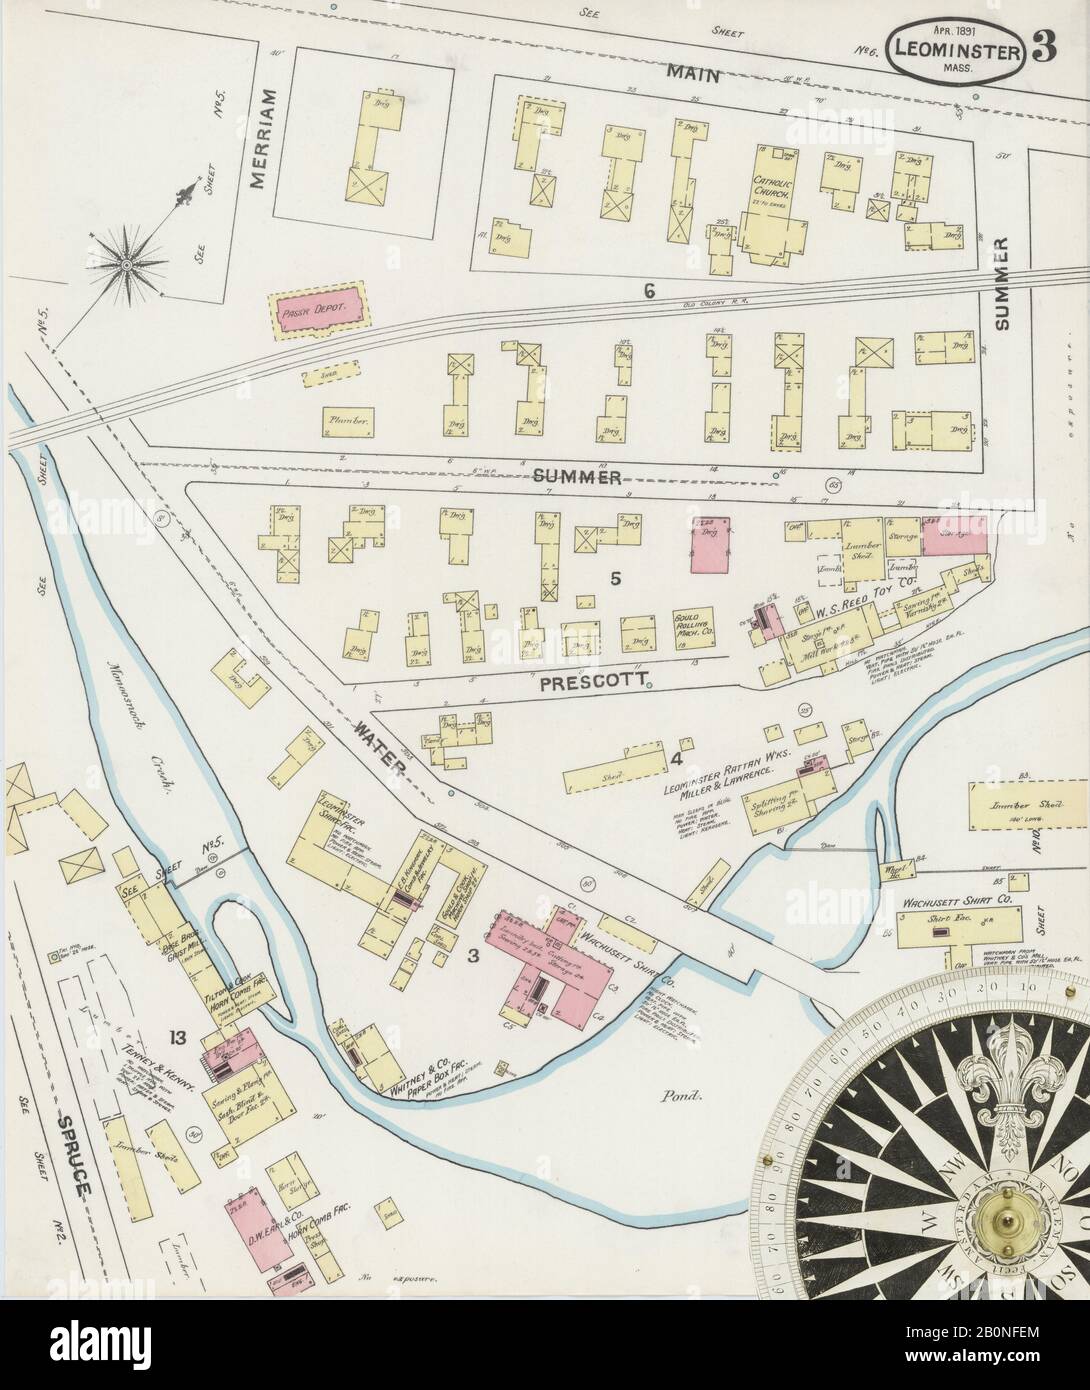 Image 3 of Sanborn Fire Insurance Map from Leominster, Worcester County, Massachusetts. Apr 1891. 10 Sheet(s), America, street map with a Nineteenth Century compass Stock Photo